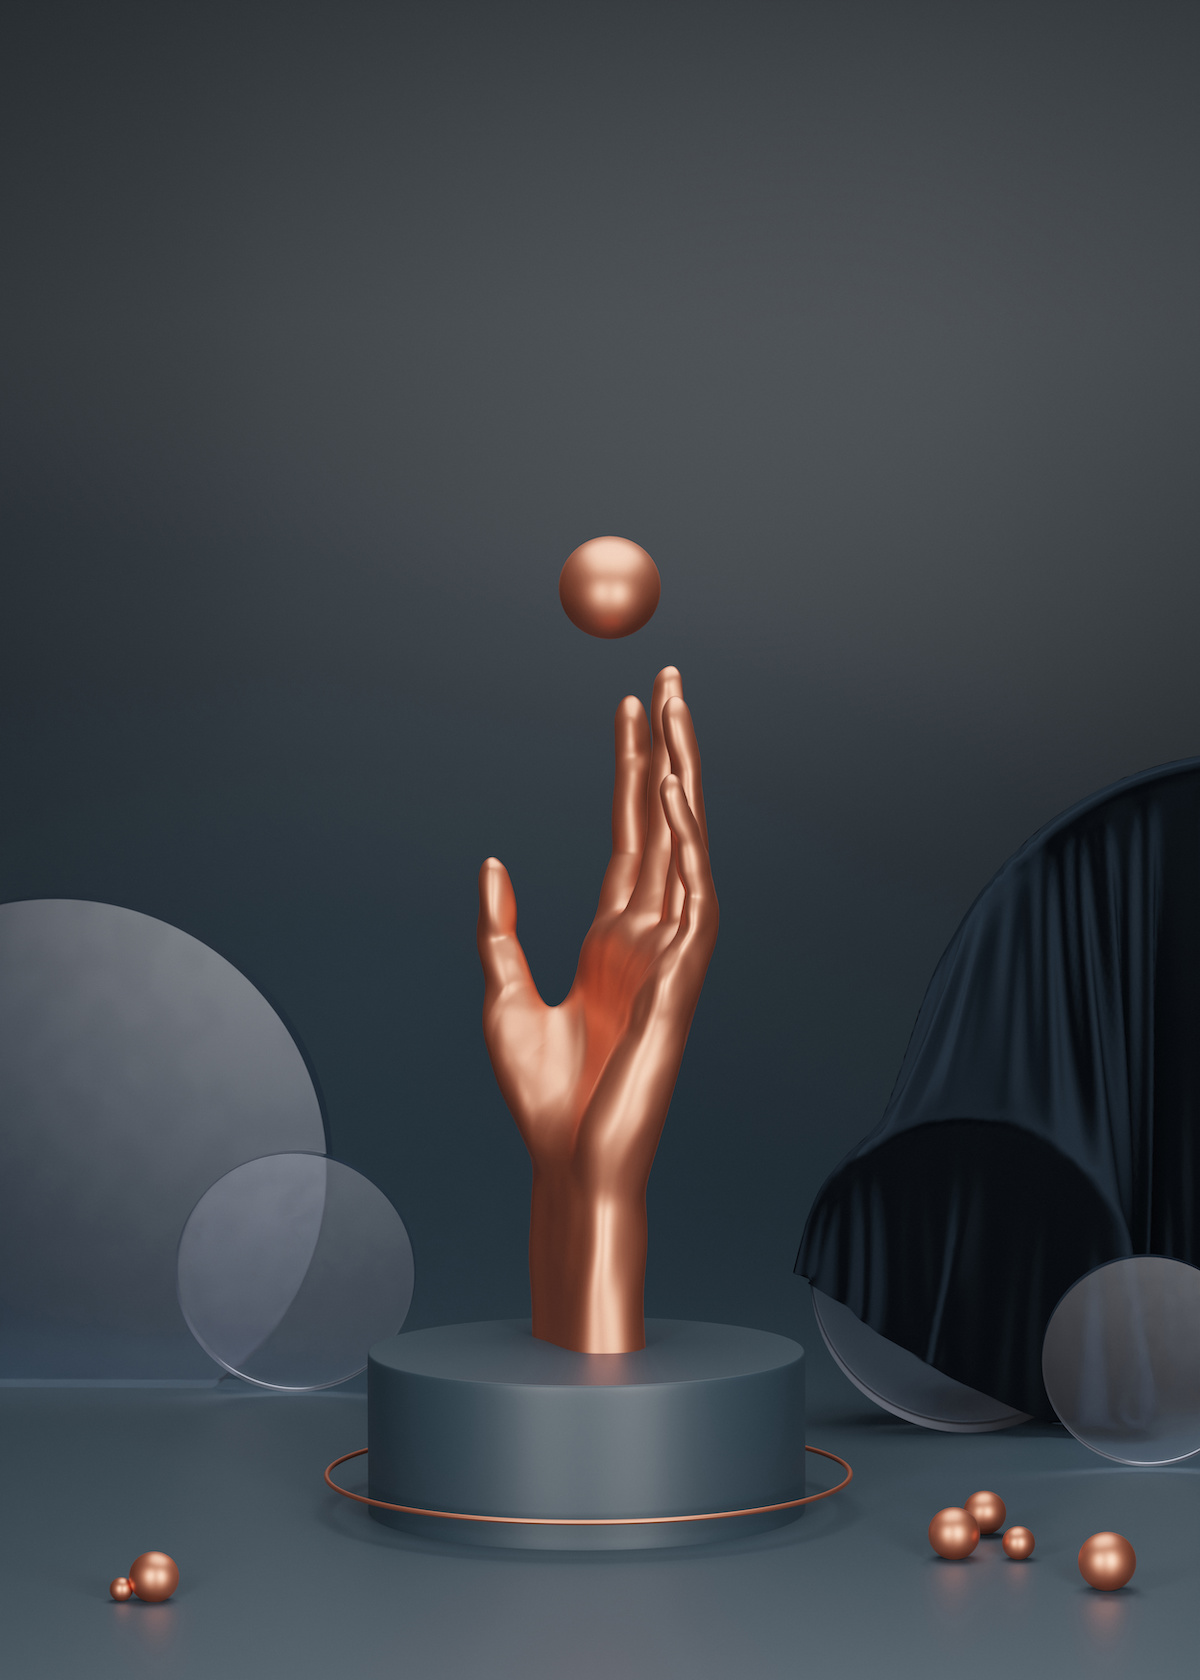 3D podium with gold copper human hand catching flying ball with geometric shapes. Dark Blue background poster with copy space. Abstract illustration. Art deco Minimalist 3d render with female palm.